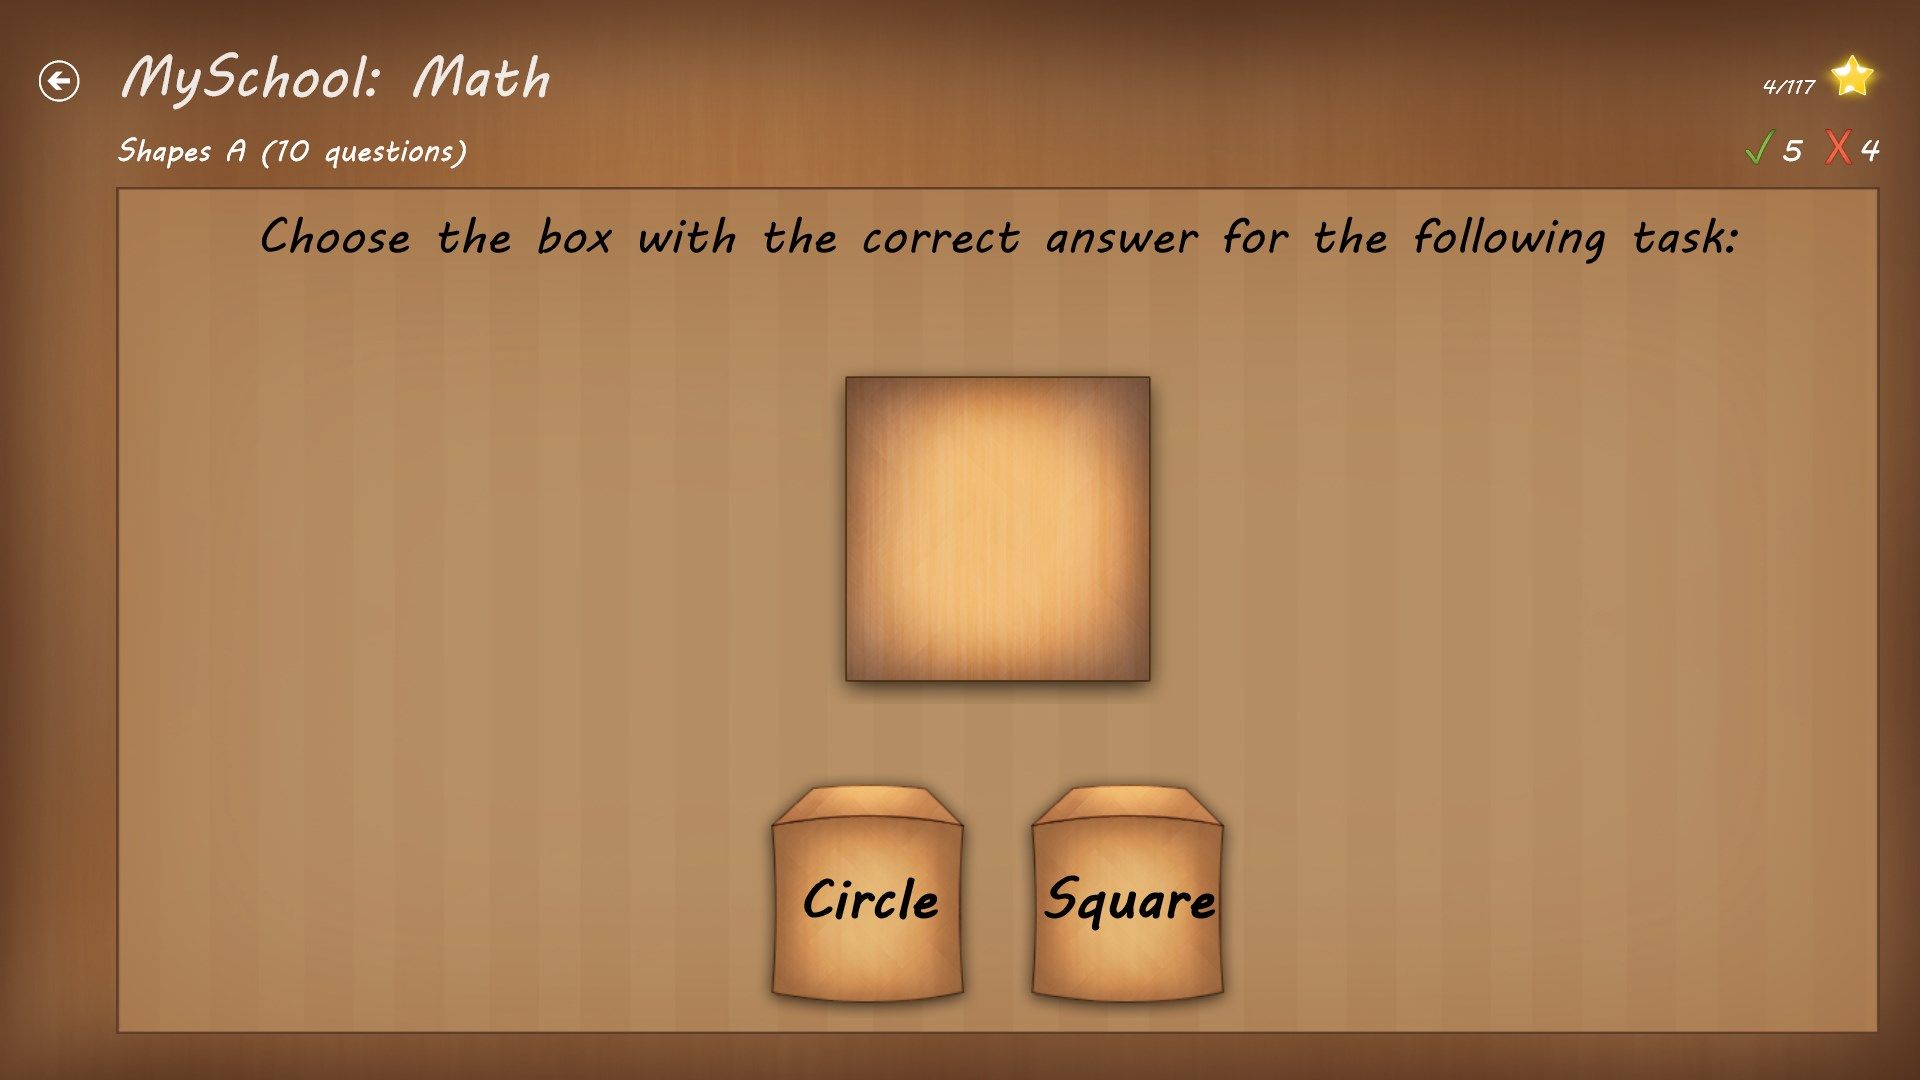 A task example with different shapes.